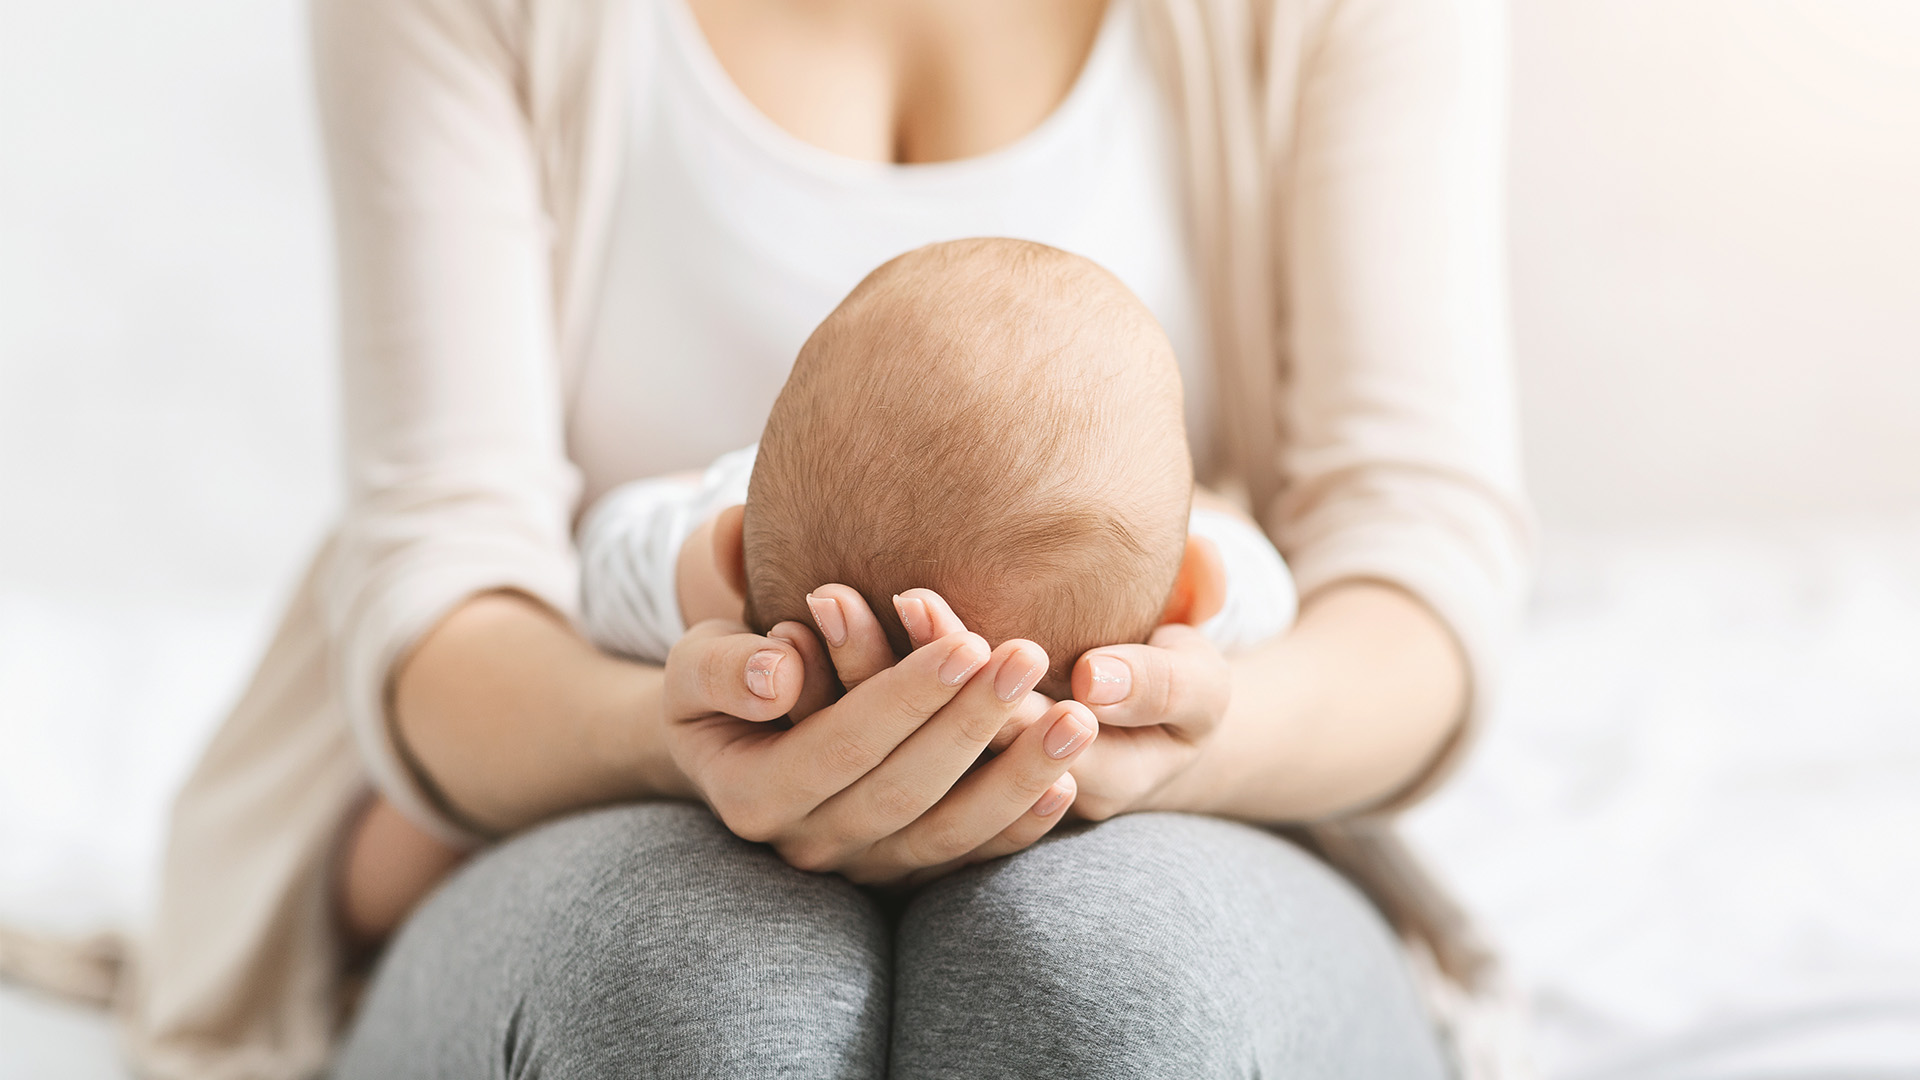 Does Your Baby’s Head Have a Flat Spot?